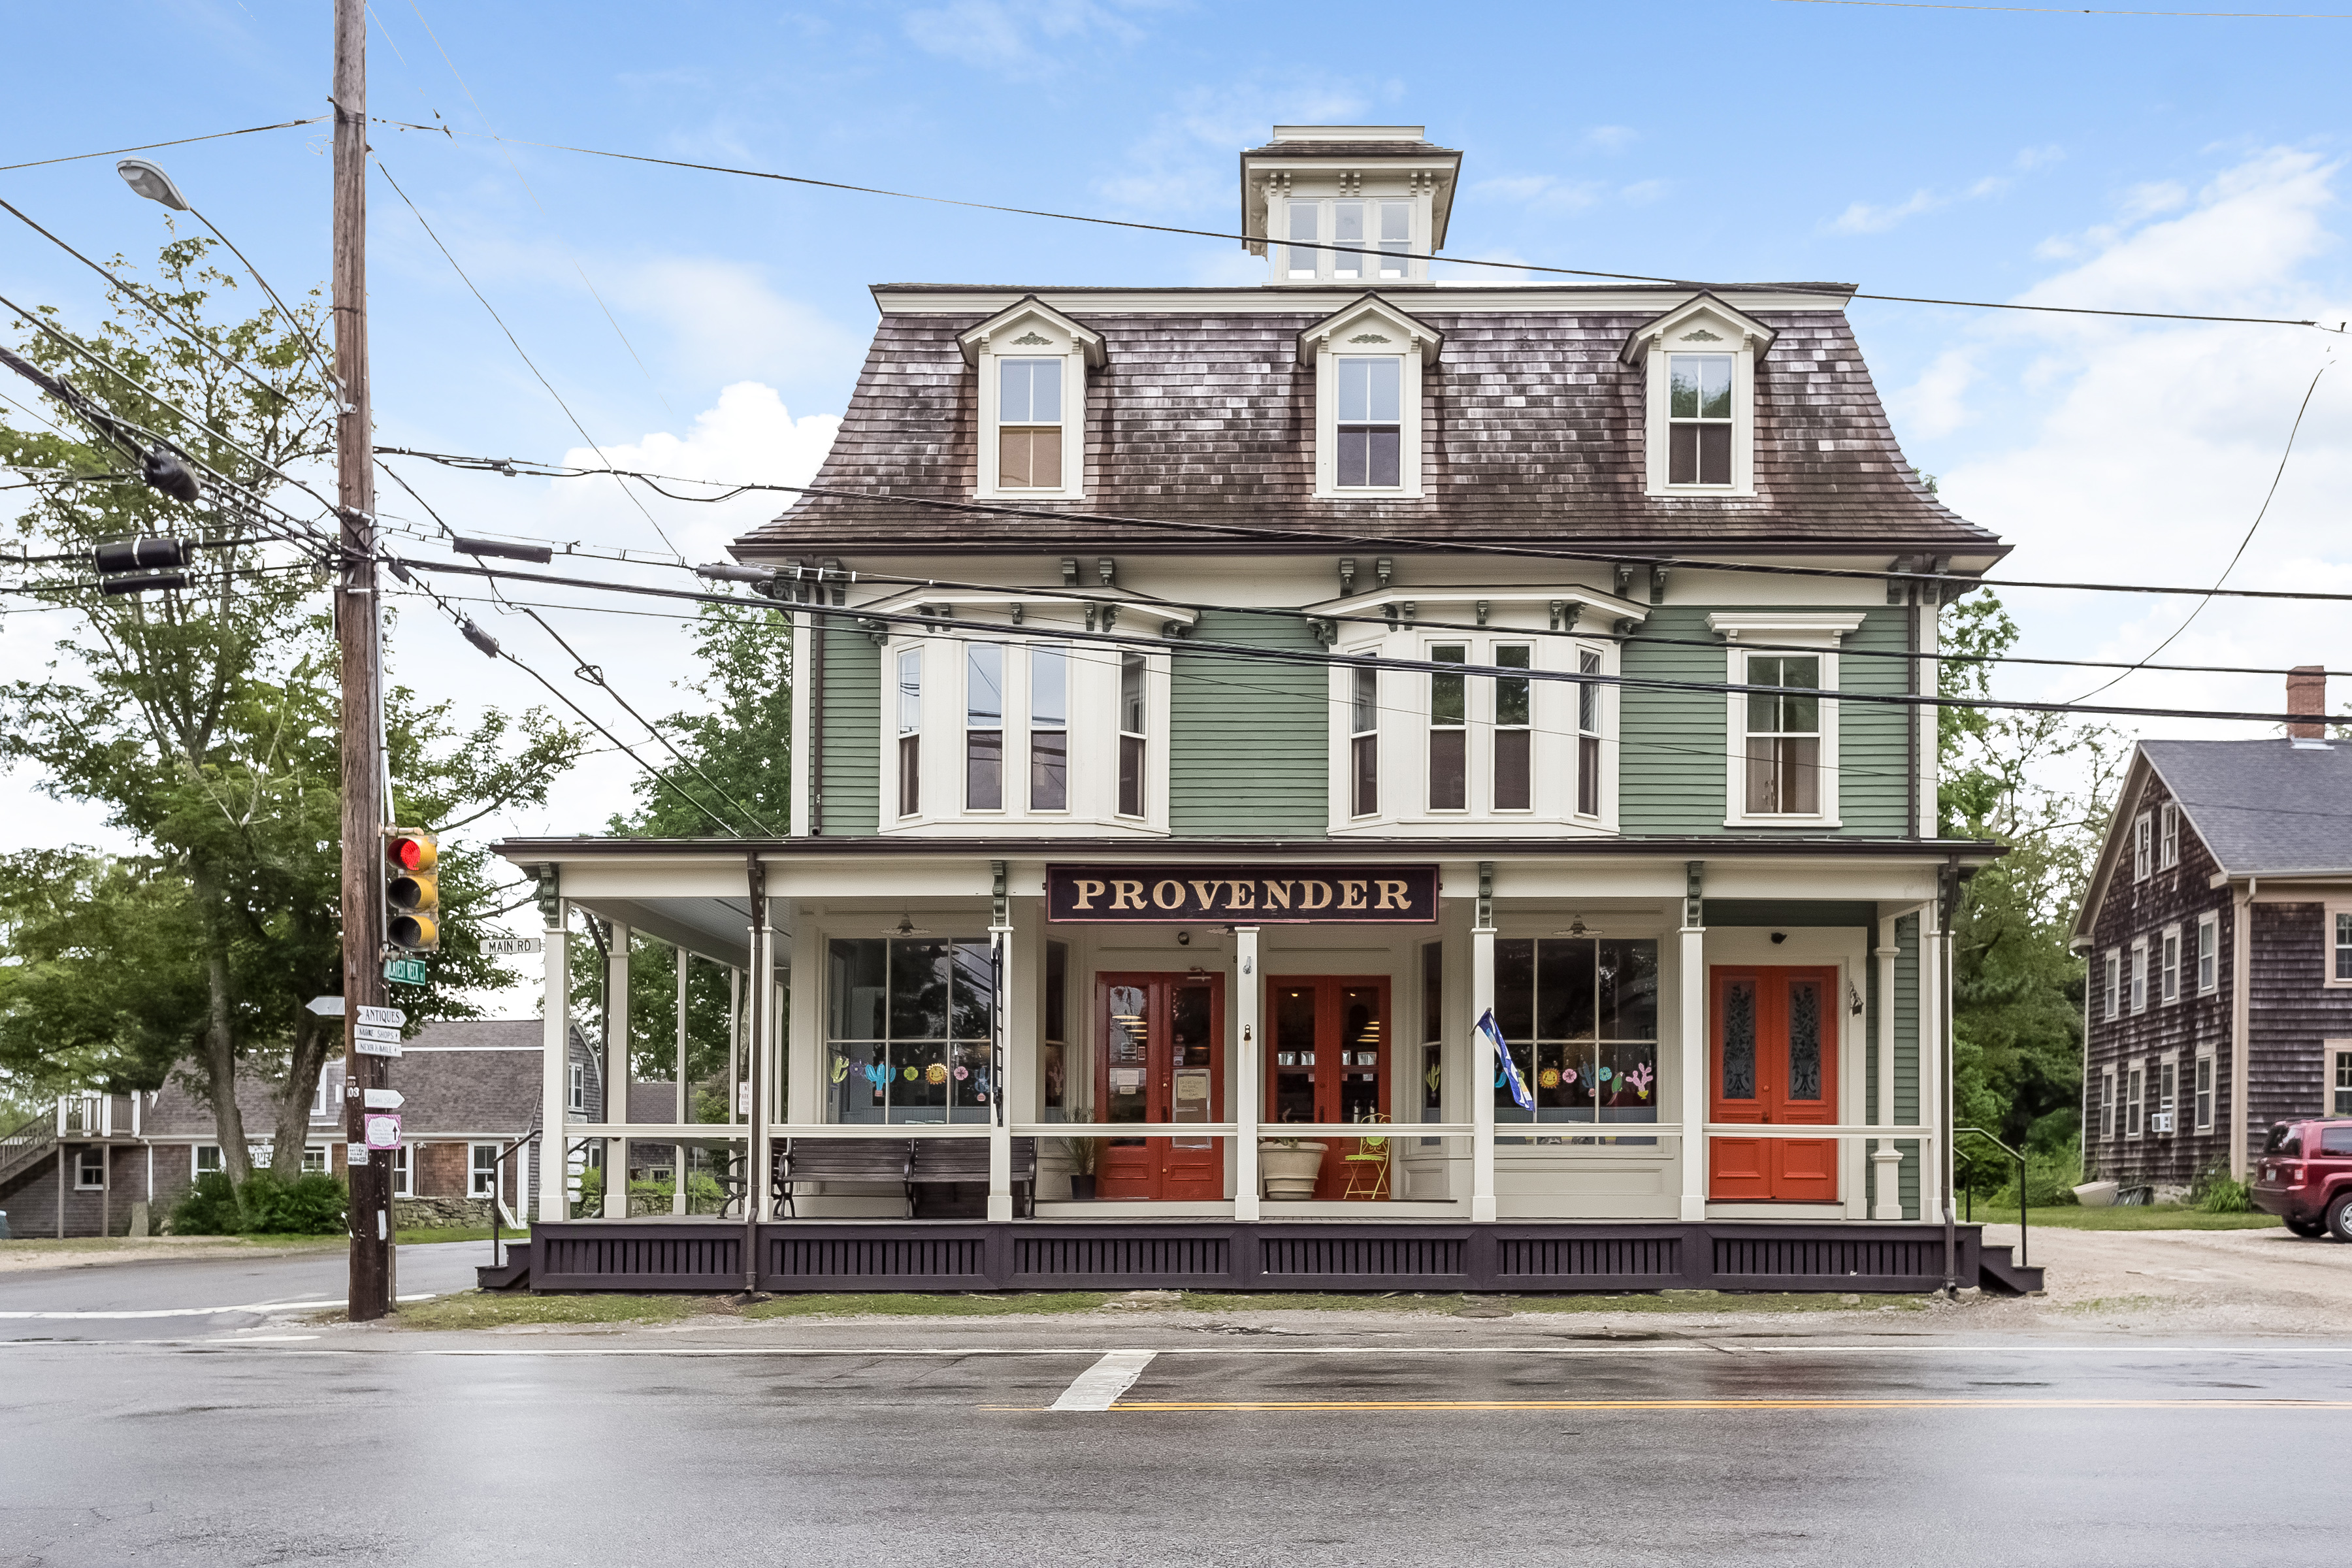 THE PROVENDER BUILDING IN TIVERTON FOUR CORNERS OFFERED AT $1.2M